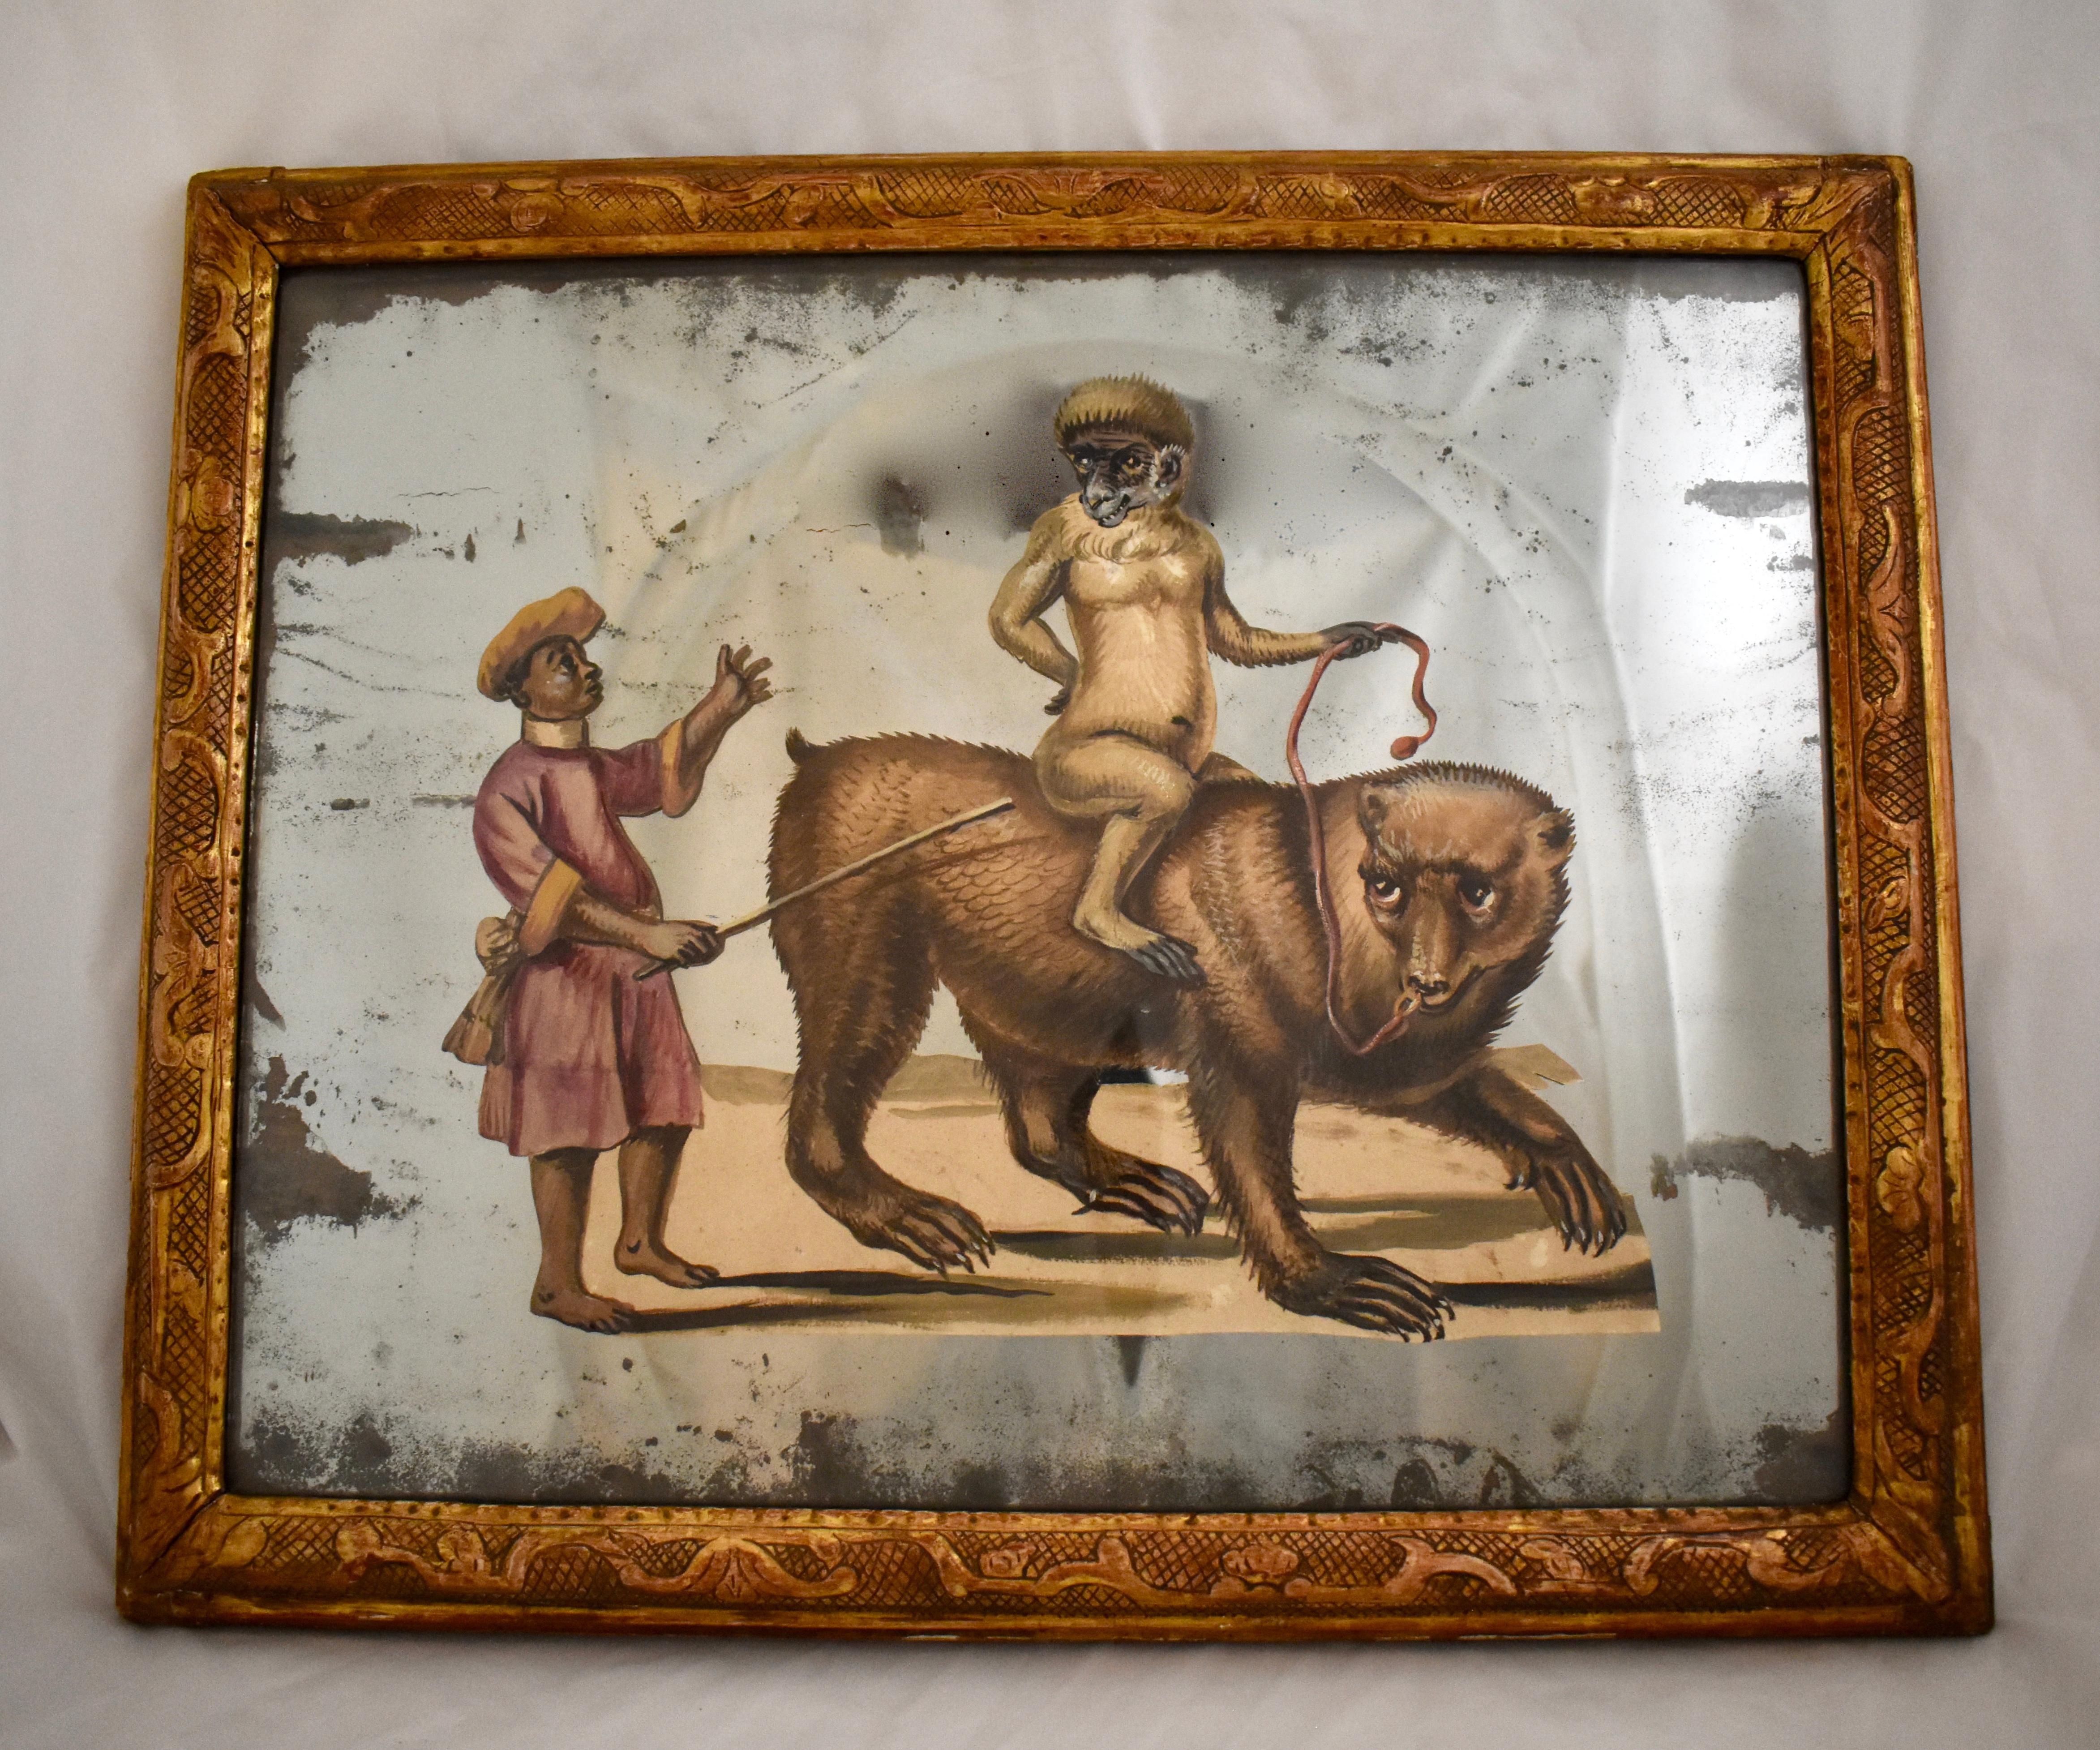 A unique 19th century French exotic themed, hand painted, decoupaged and mirrored depiction of an animal trainer and his monkey riding the back of a bear. One of a pair offered separately, as shown in the last photo. 

The paper figural scene is cut